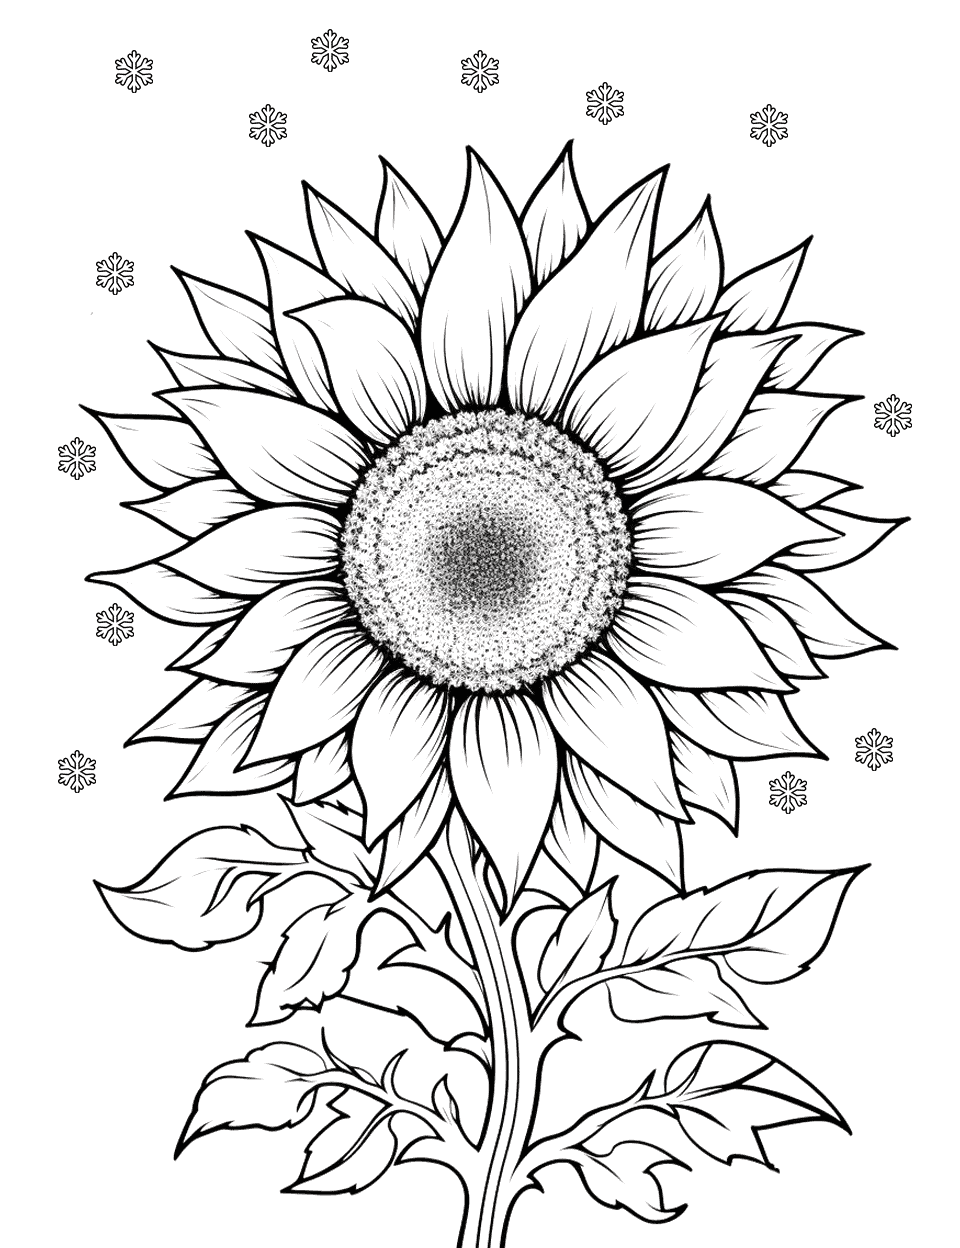 Sunflower and Snowflakes Coloring Page - A sunflower with gentle snowflakes falling around it.